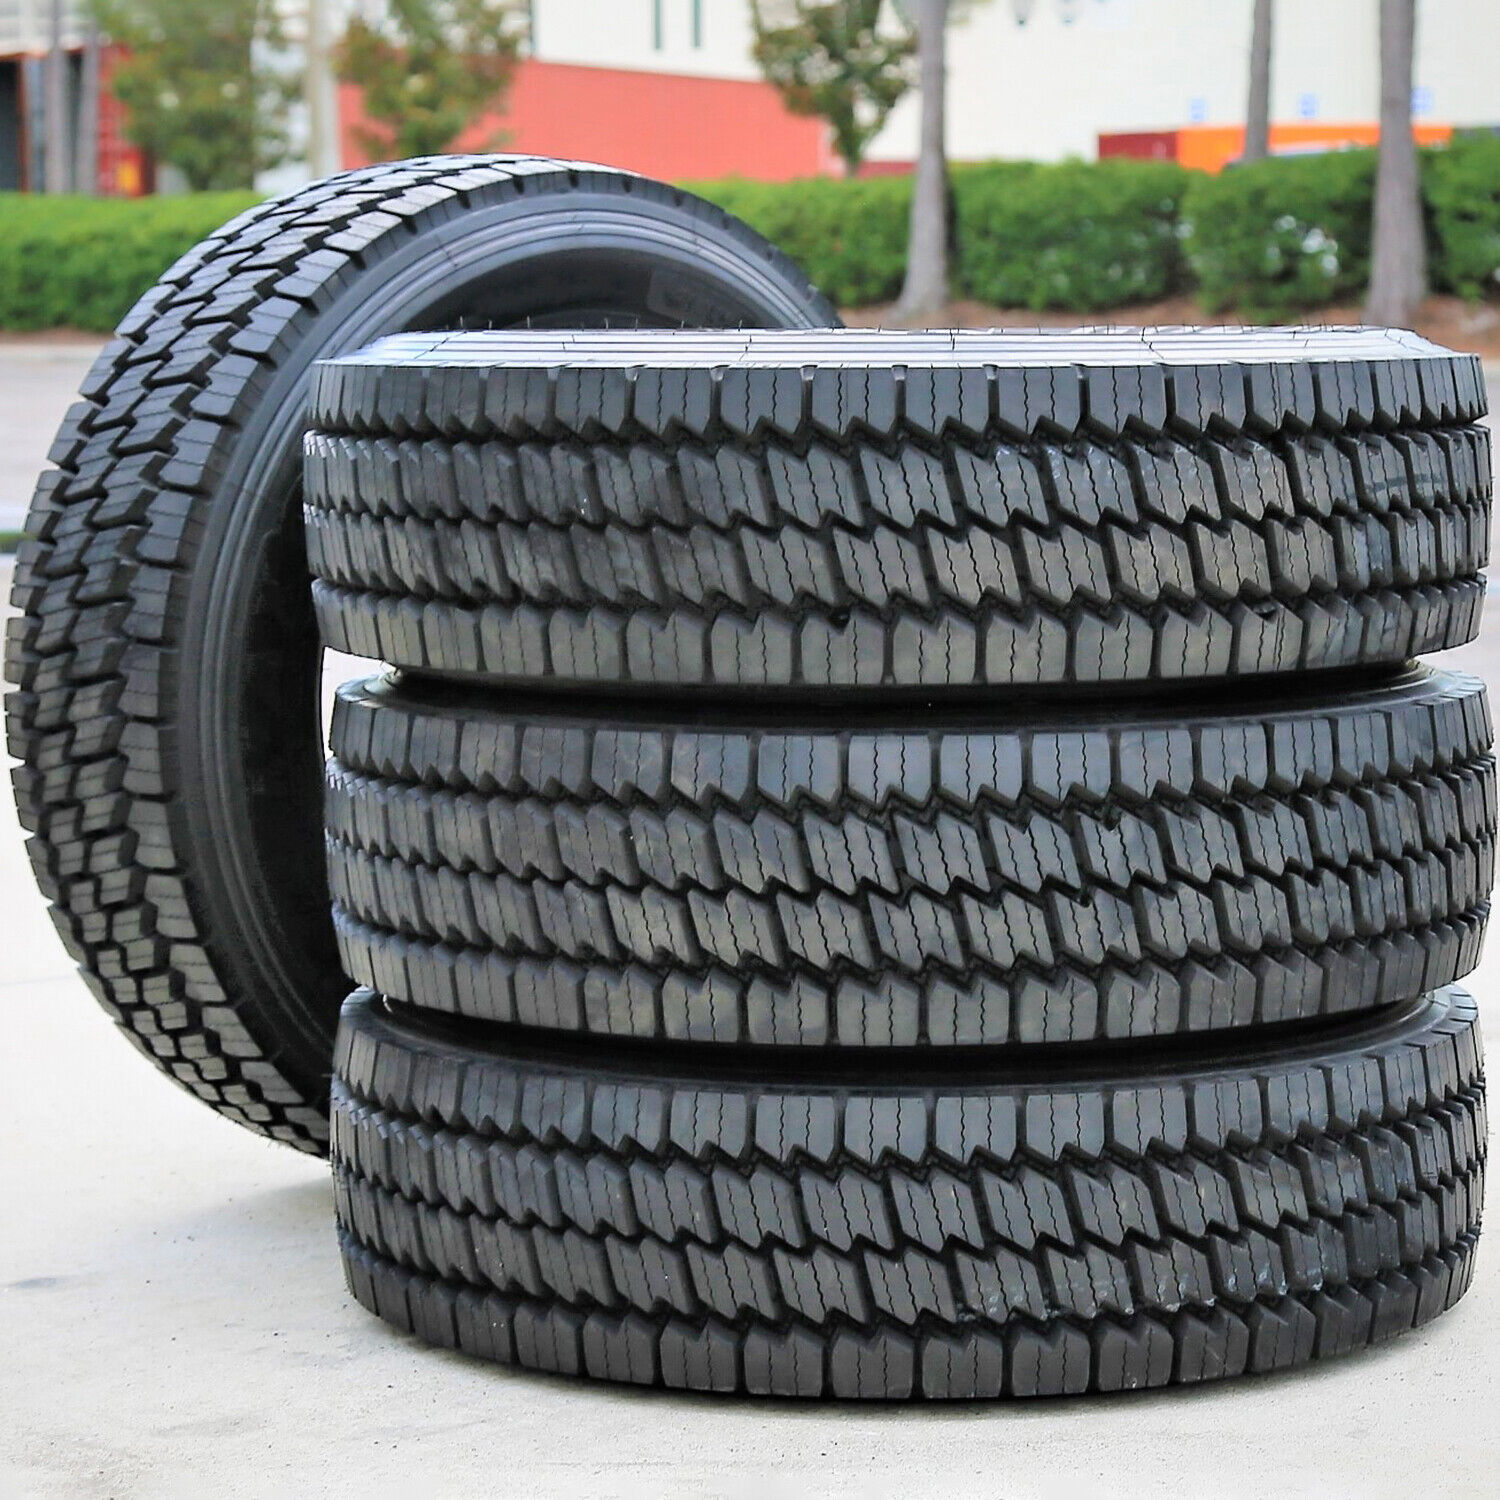 4 Tires Green Max GDR202 225/70R19.5 Load G 14 Ply Drive Commercial